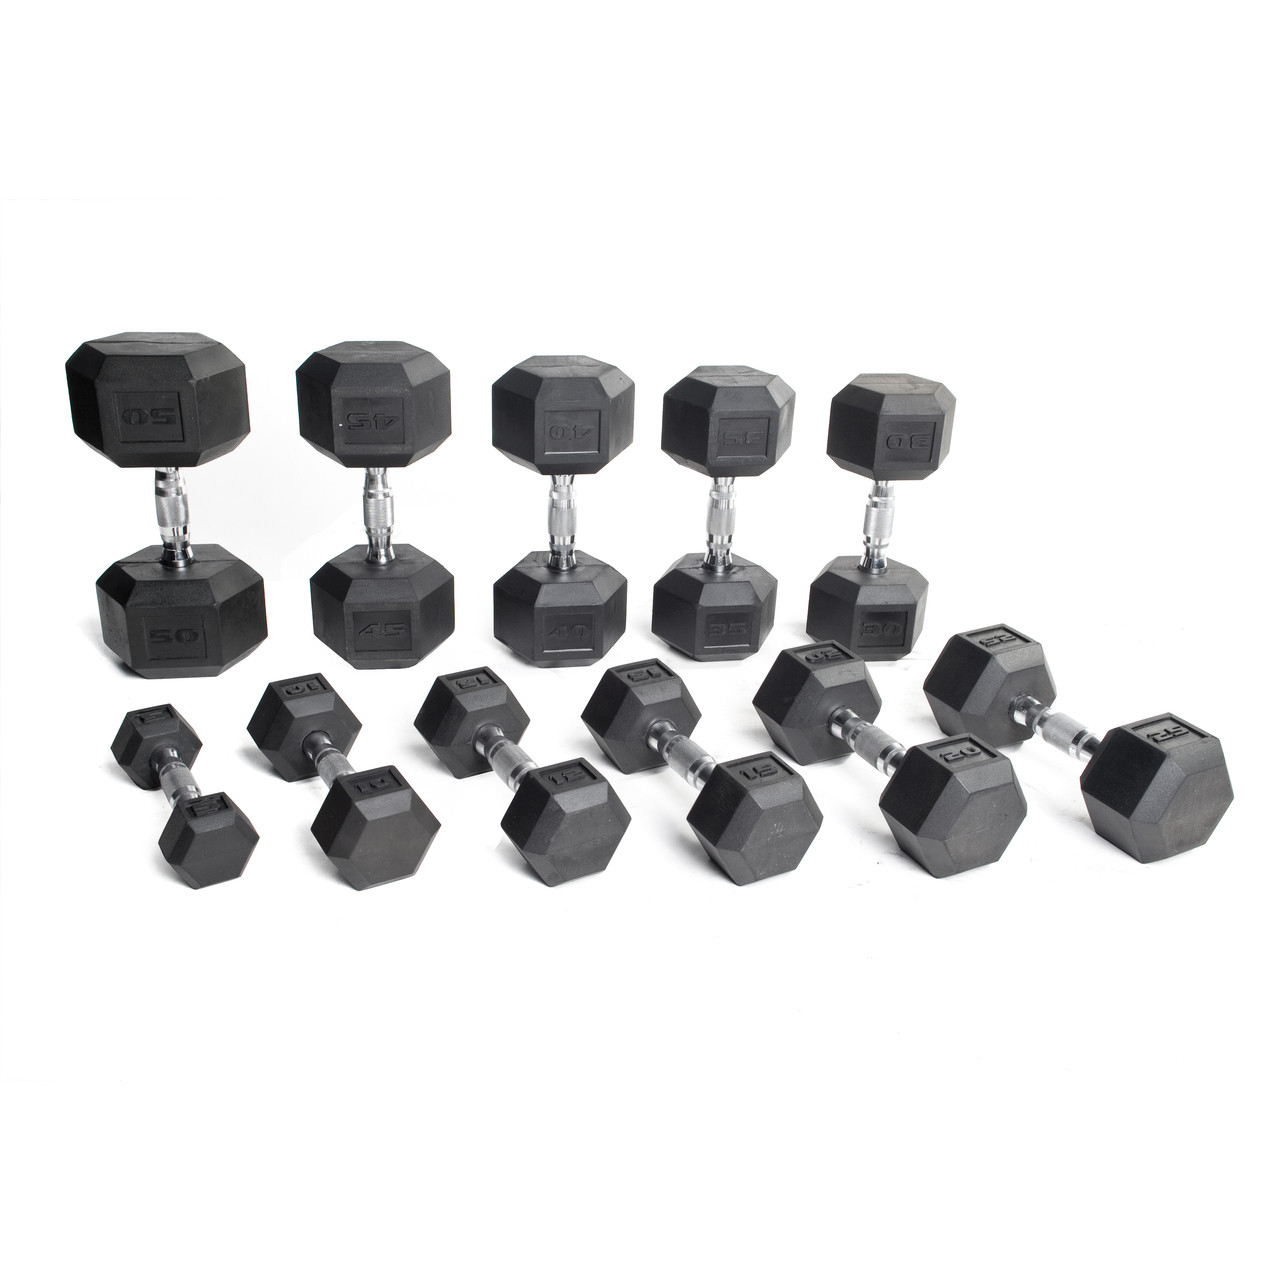 cap 5lb dumbbell Fast Free Shipping! set Of 2 